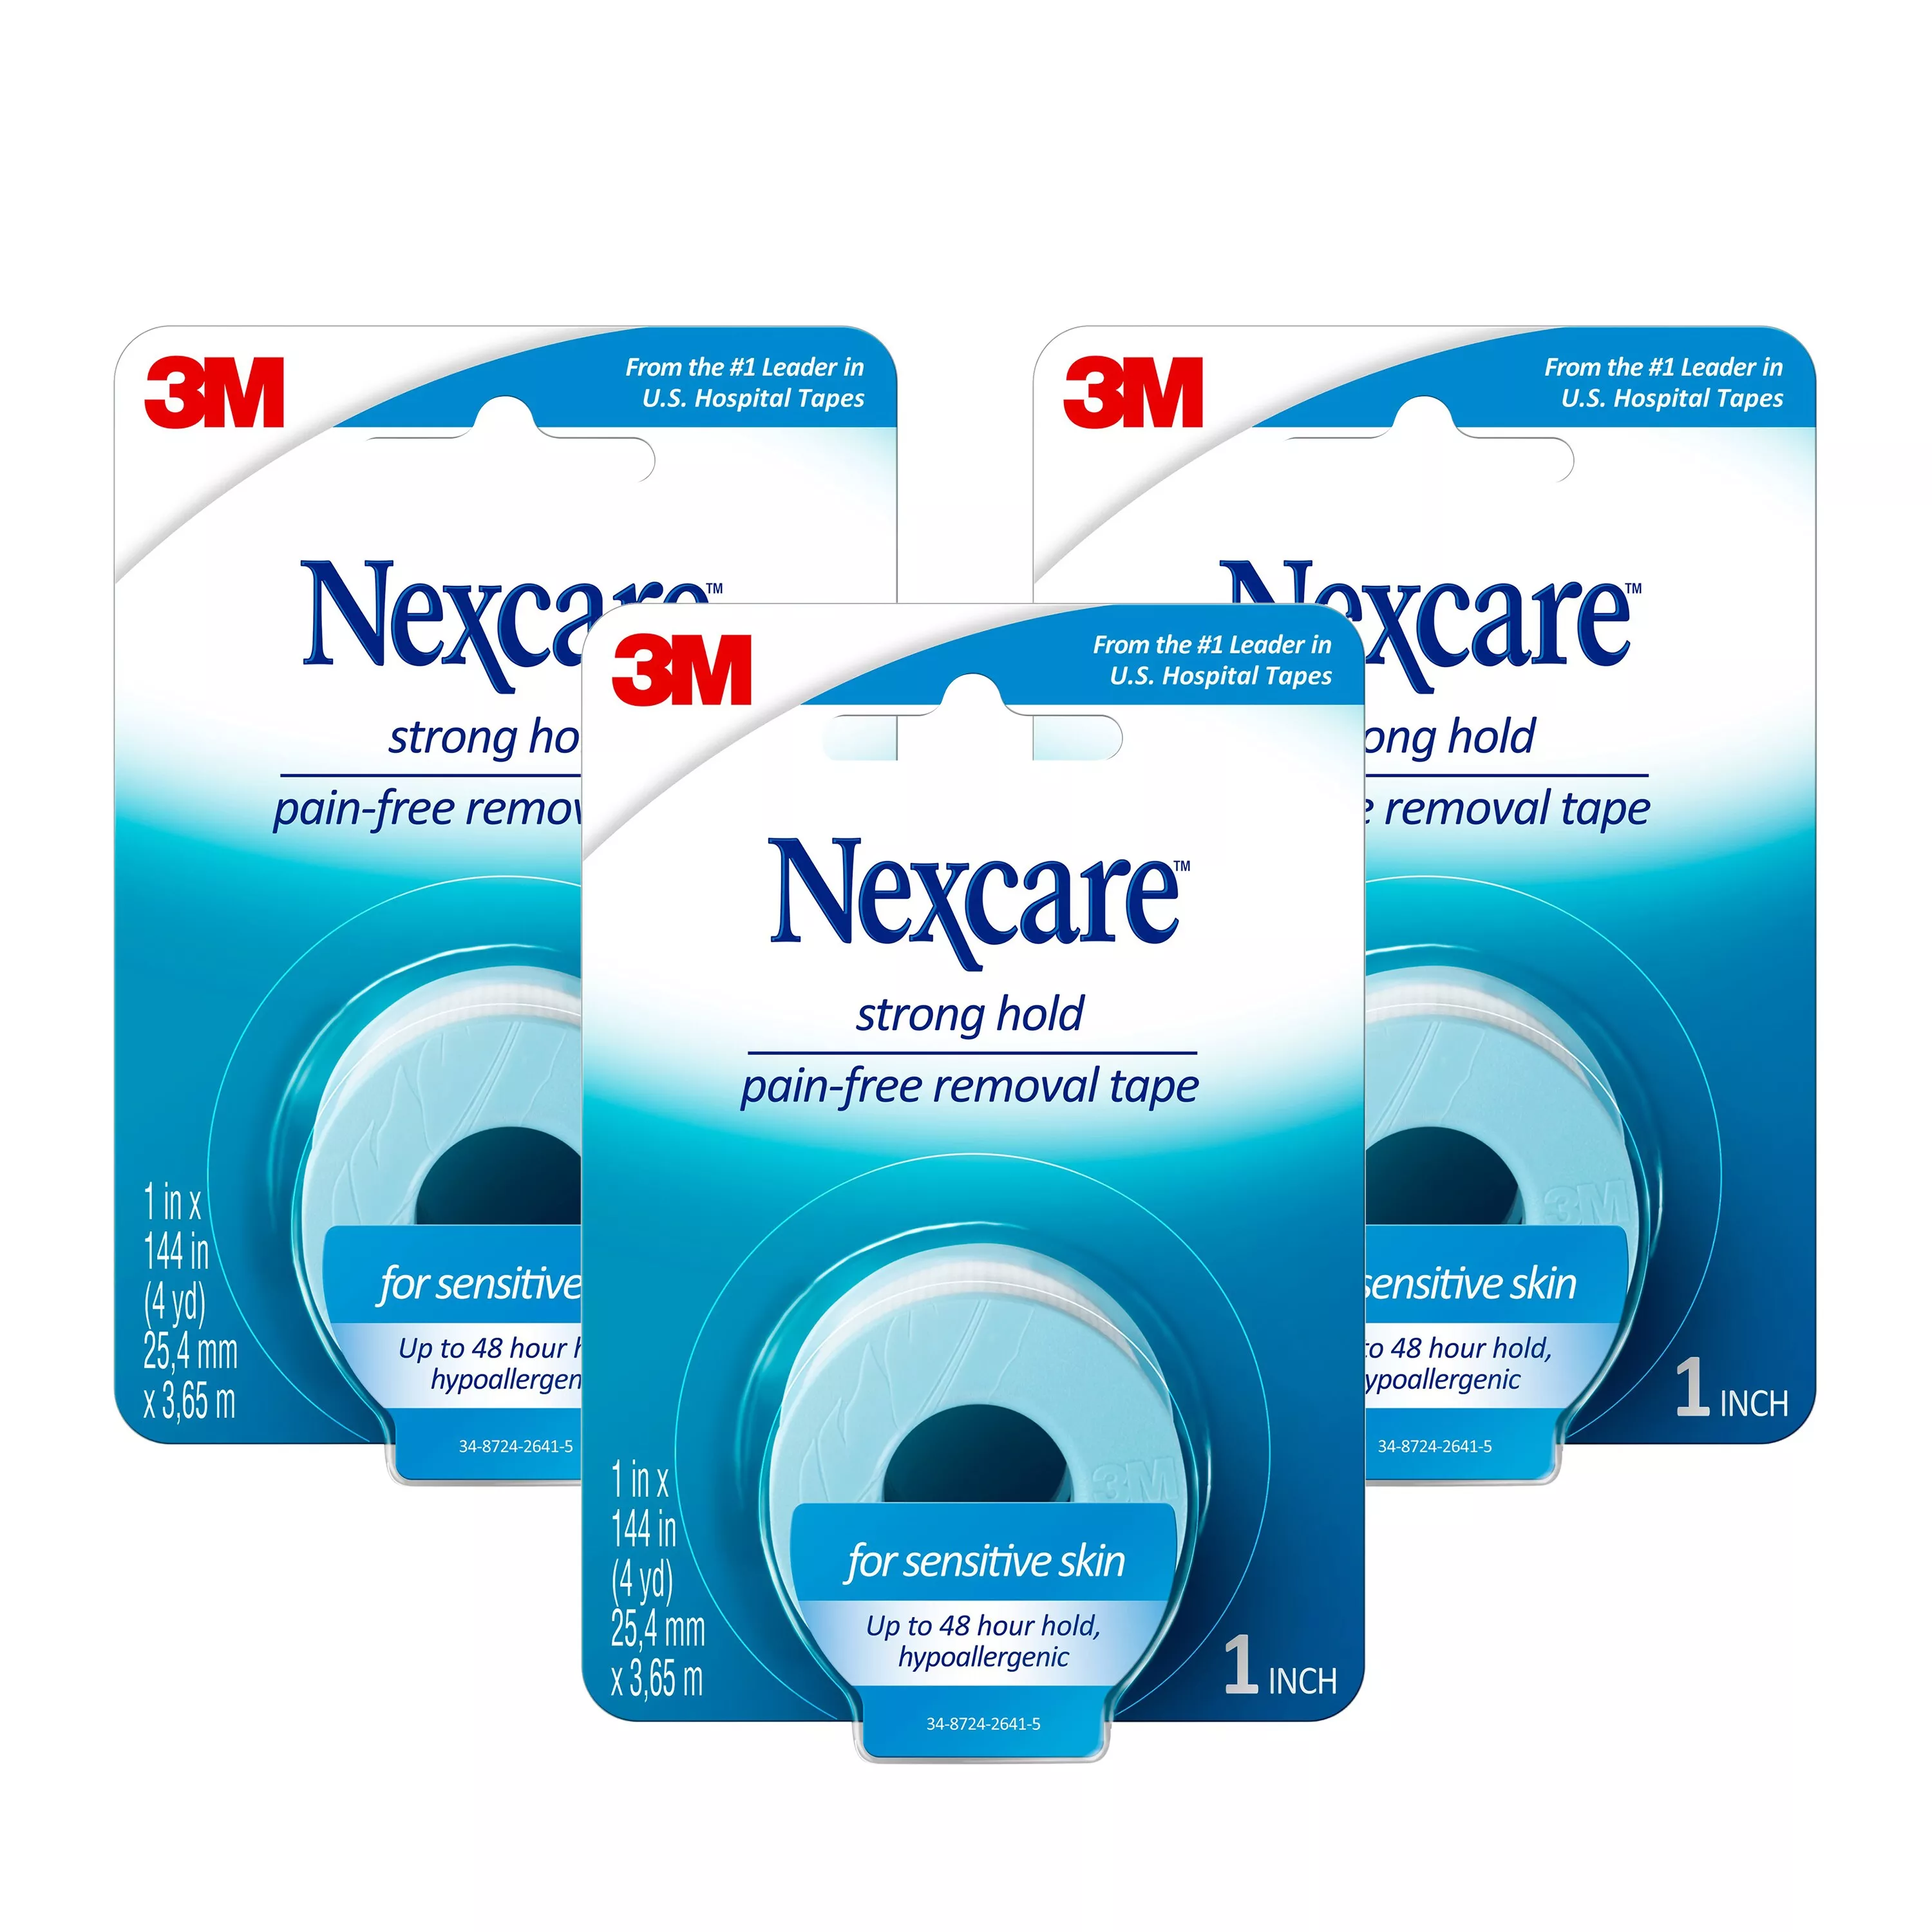 SKU 7100288533 | Nexcare™ Strong Hold Pain-Free Removal Tape SST1CA3PK-SIOC